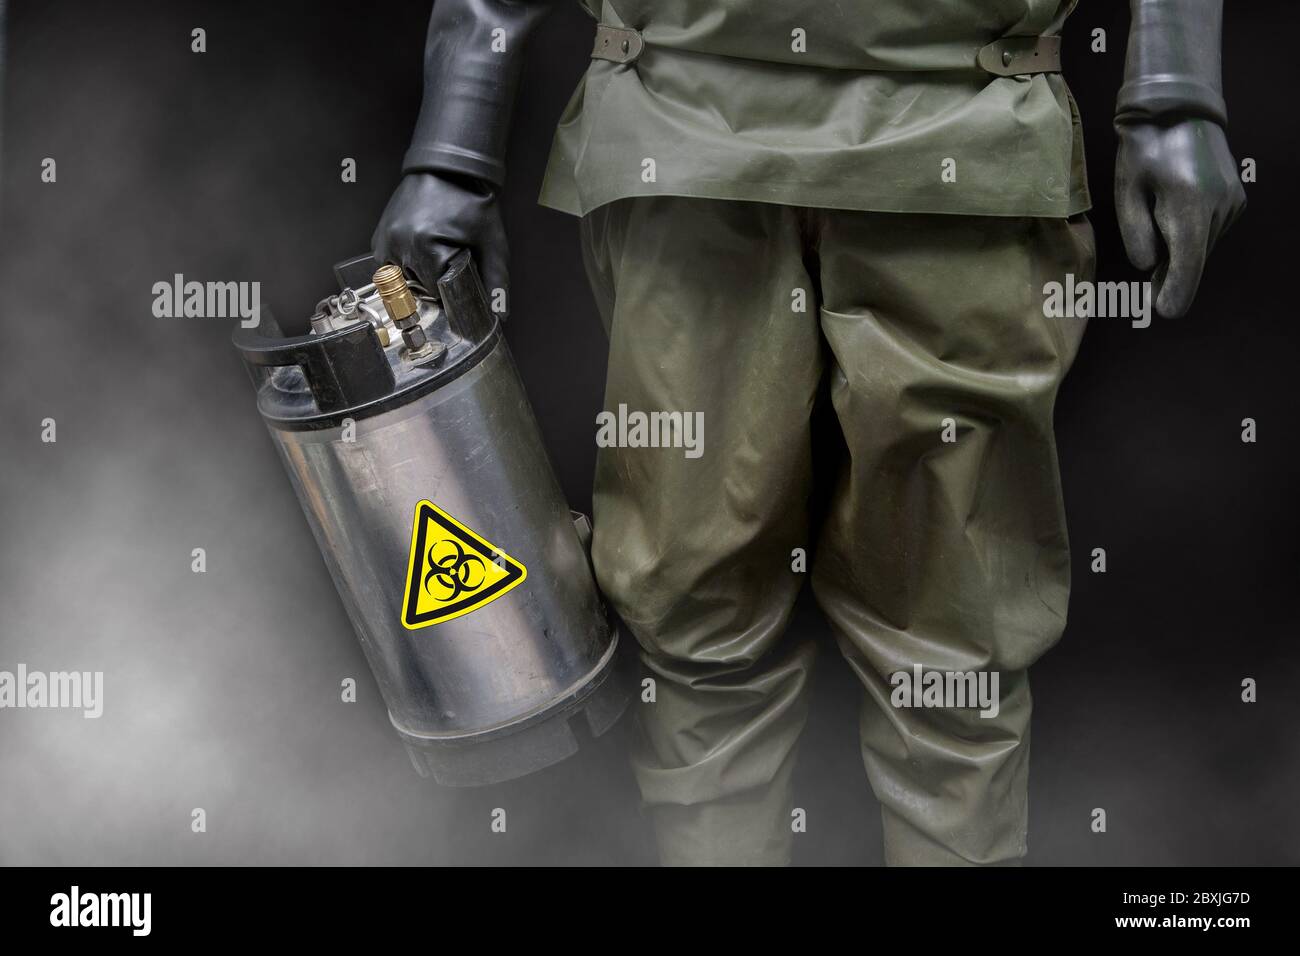 A man in a NBC full protective suit holds a special metal container in his hand with a warning sticker of biohazard. Stock Photo